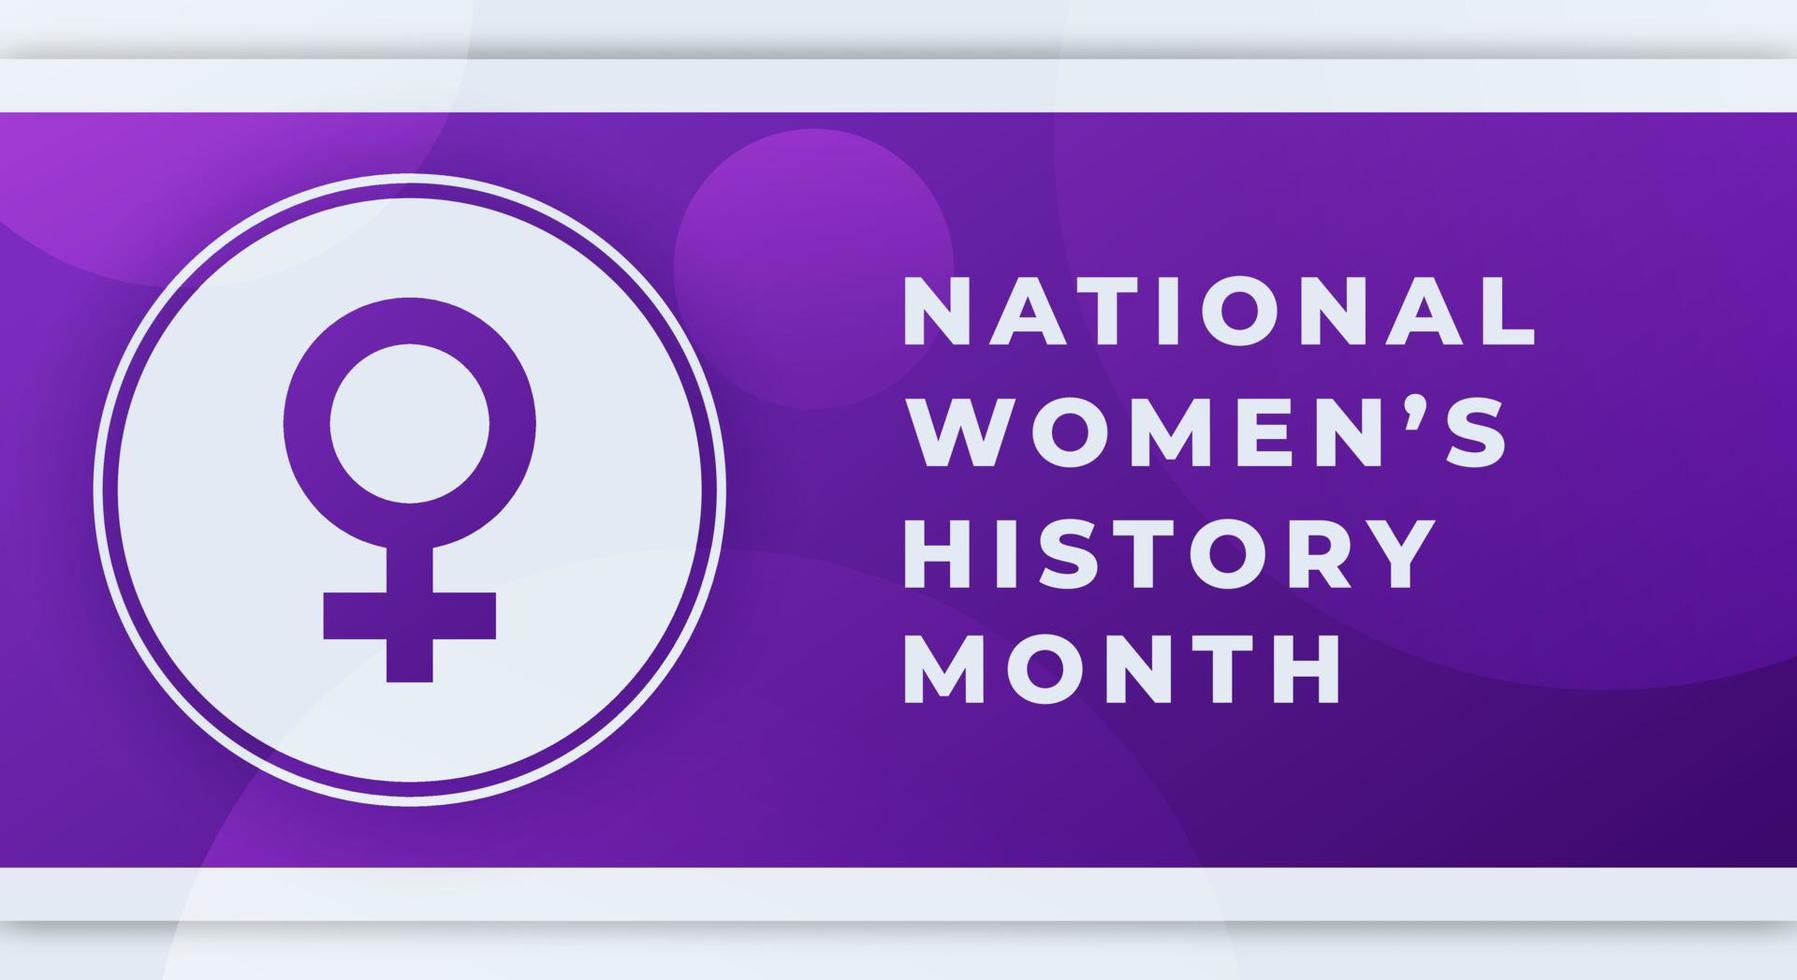 Happy National Womens History Month March Celebration Vector Design Illustration. Template for Background, Poster, Banner, Advertising, Greeting Card or Print Design Element